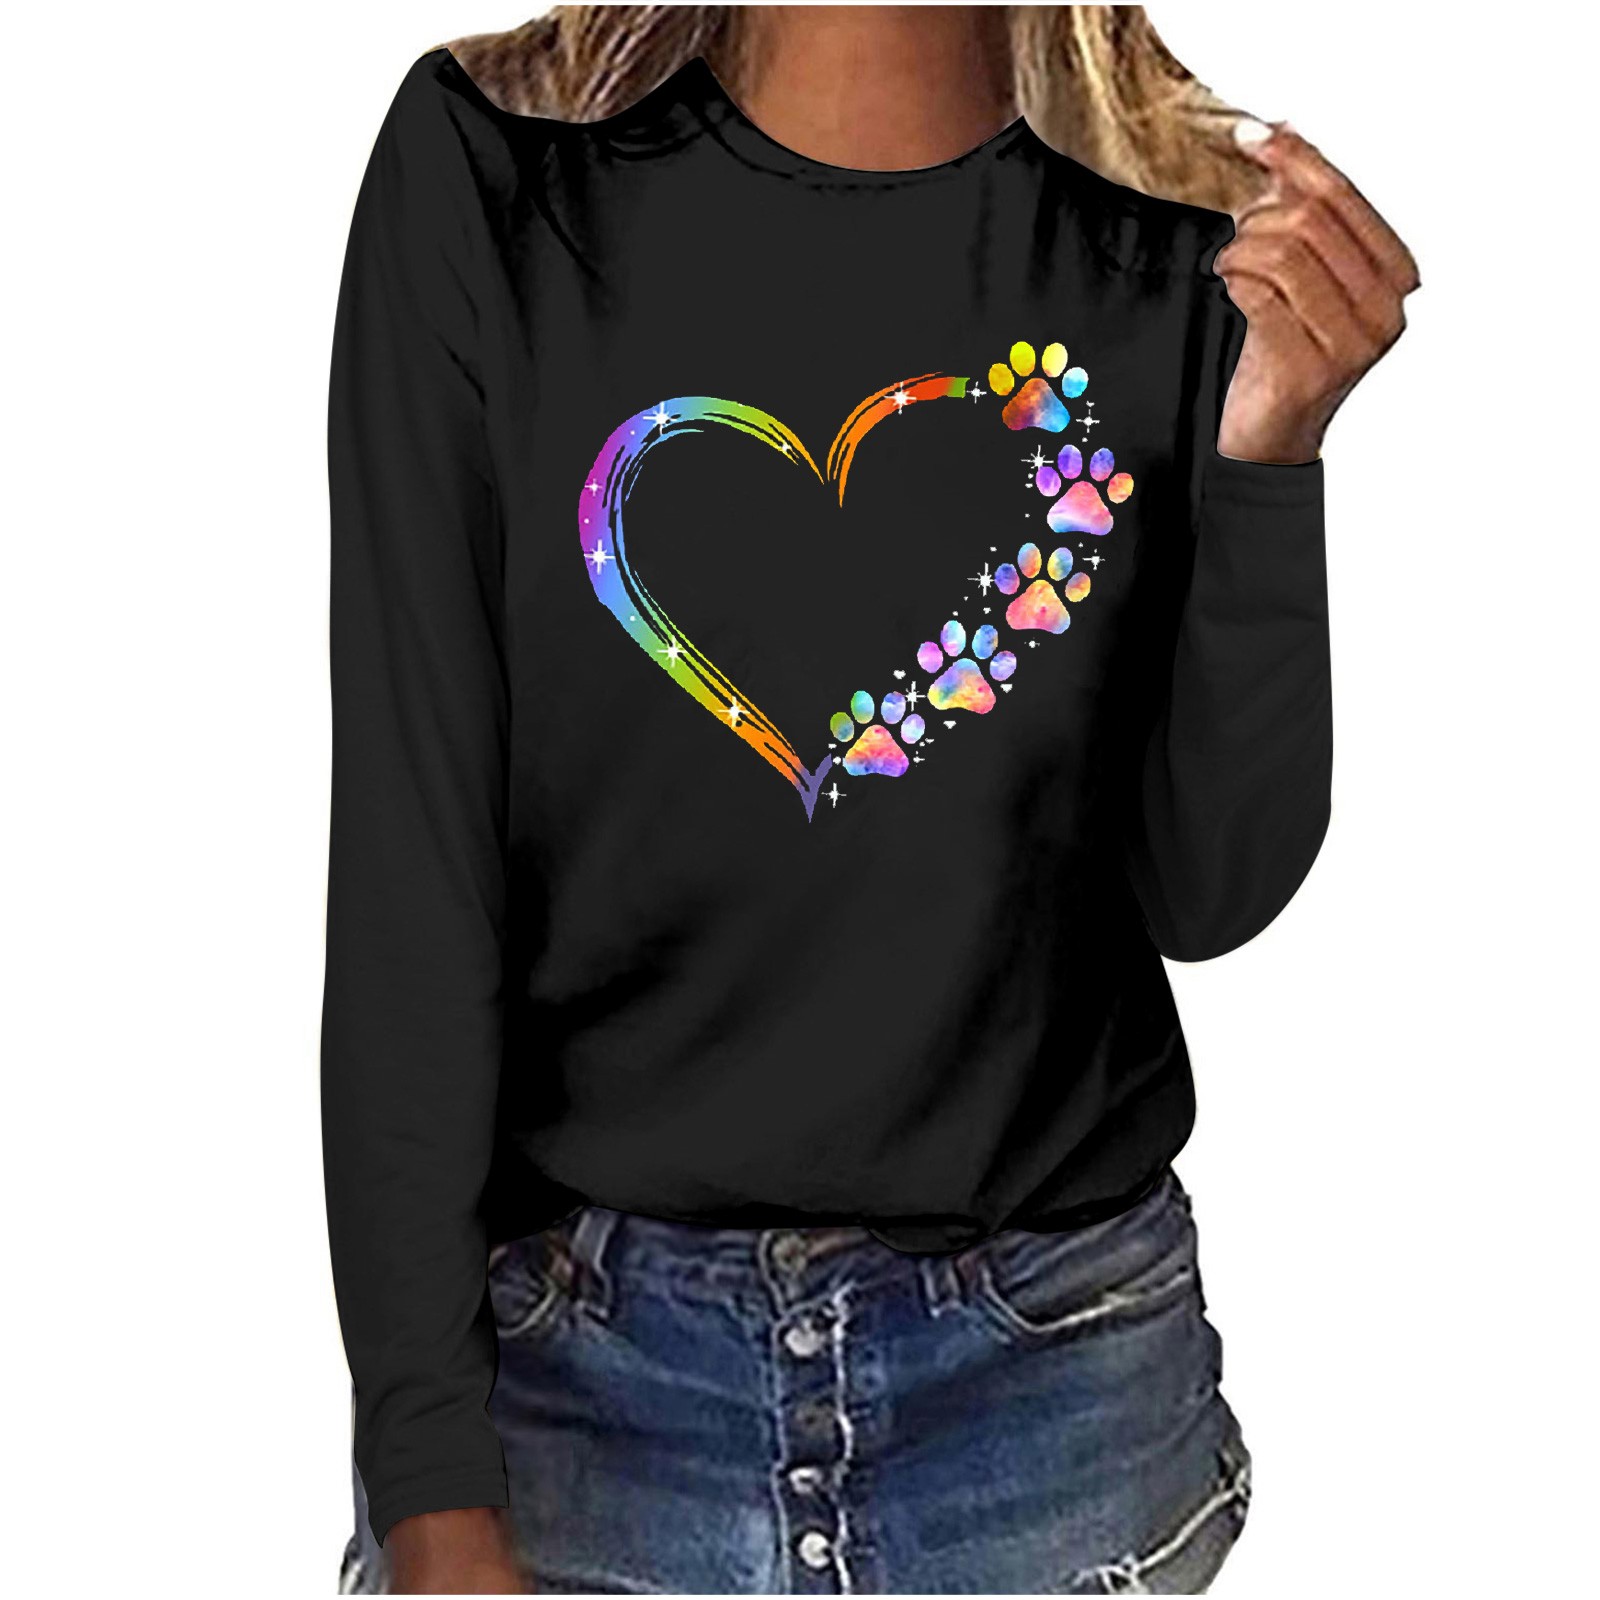 Graphic Tees for Women Trendy Fashion Summer Sexy Fold Printed Regular Long Sleeves Round Neck Button Top - image 1 of 5